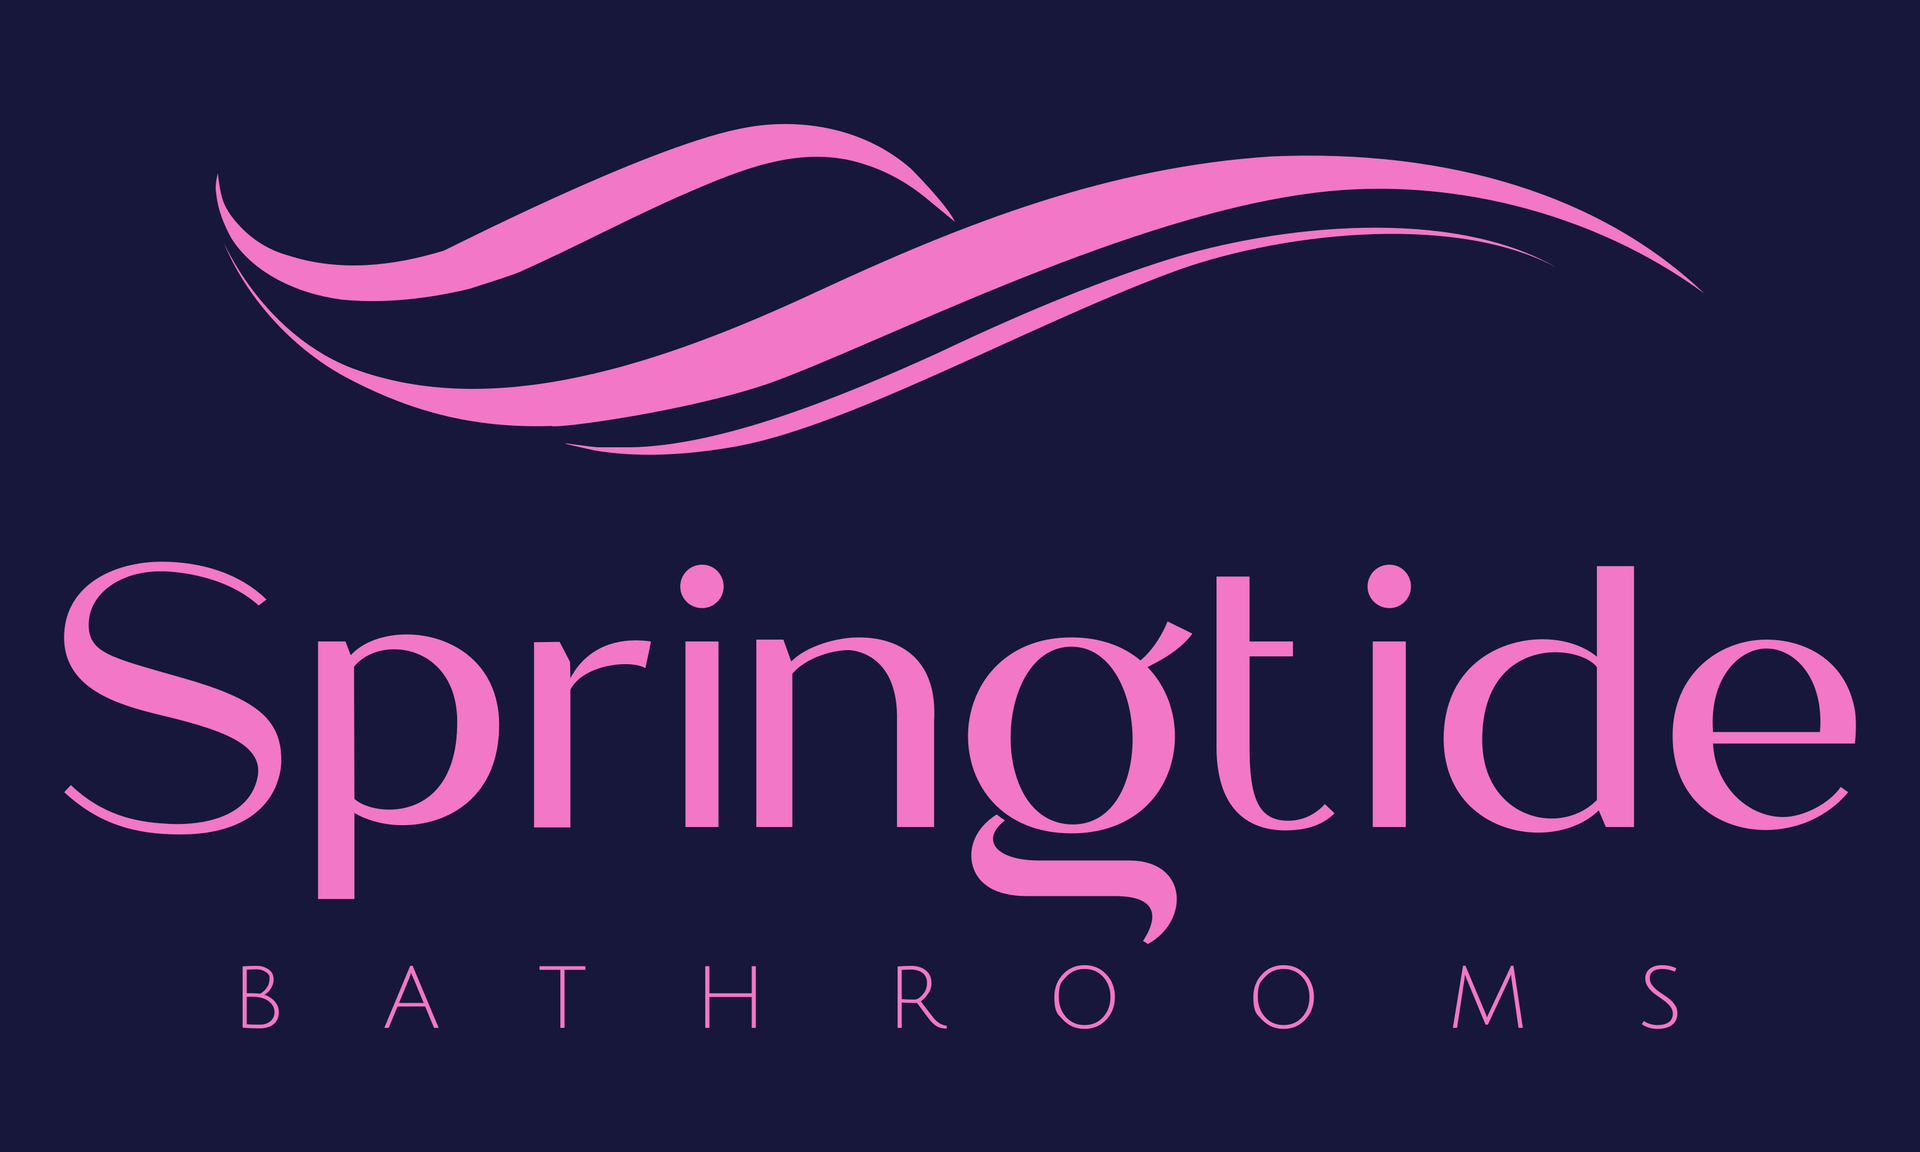 A logo for springtide bathrooms with a pink wave